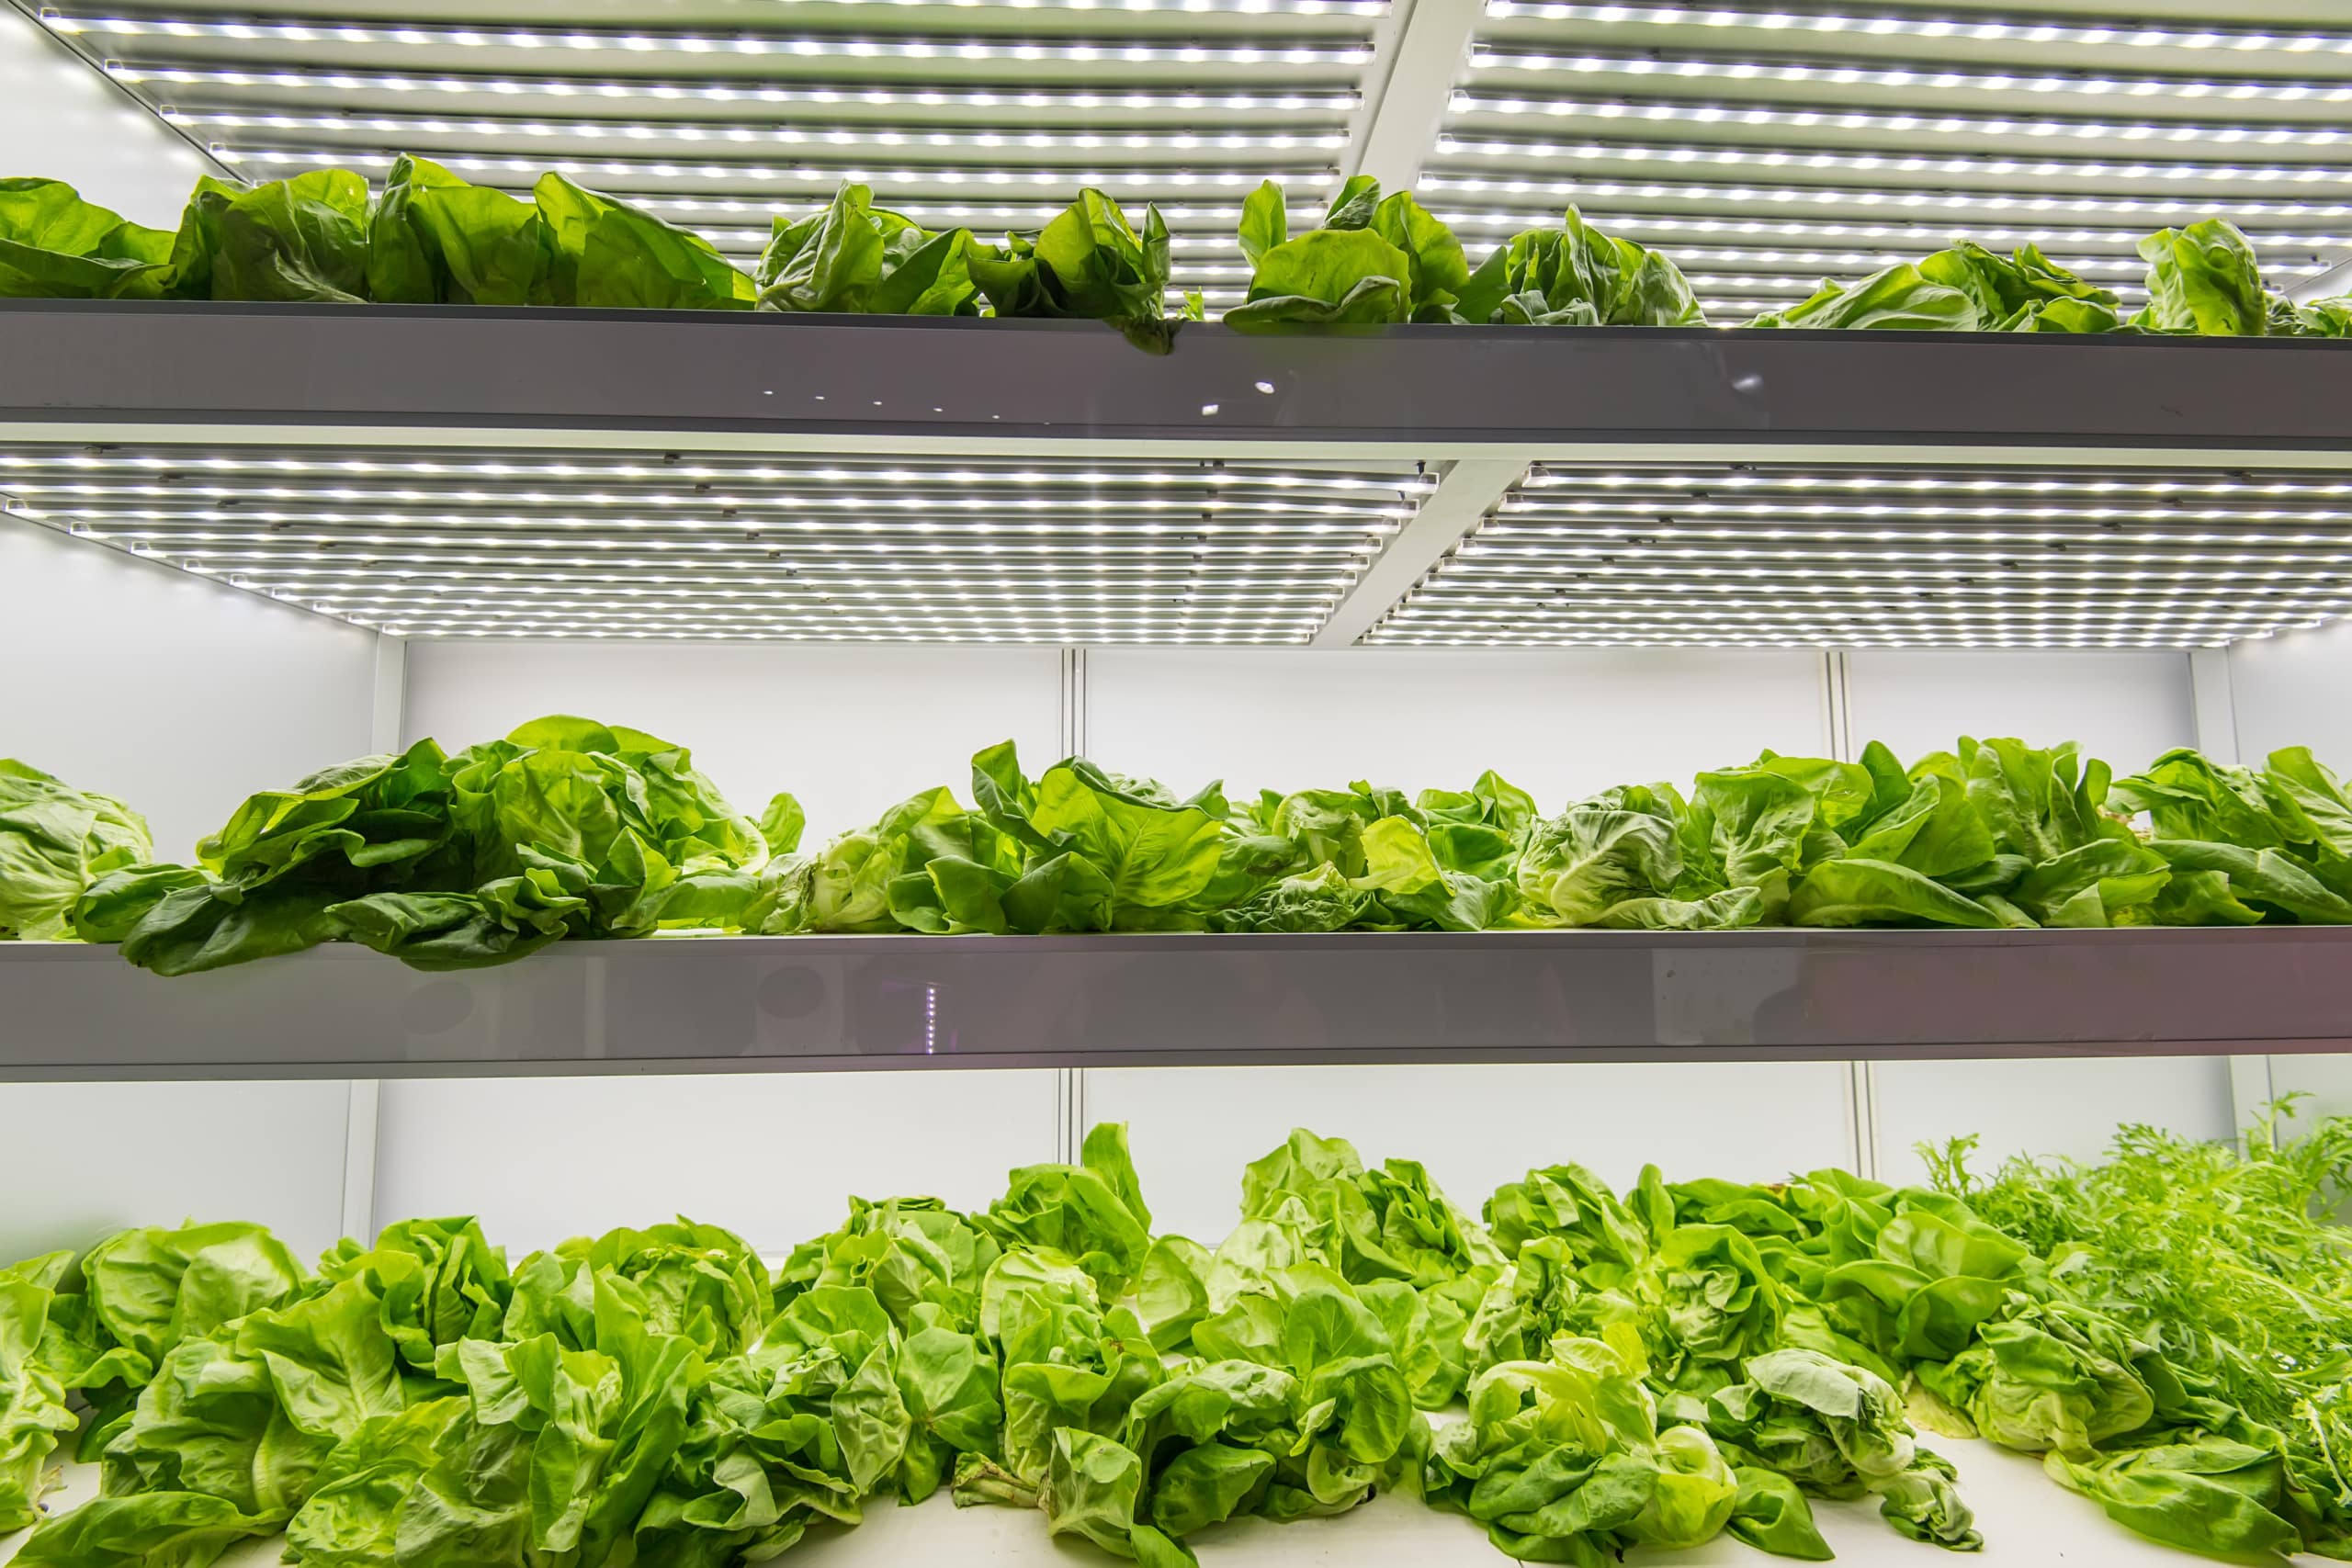 Lettuce being grown indoor using Controlled Environment Agriculture.